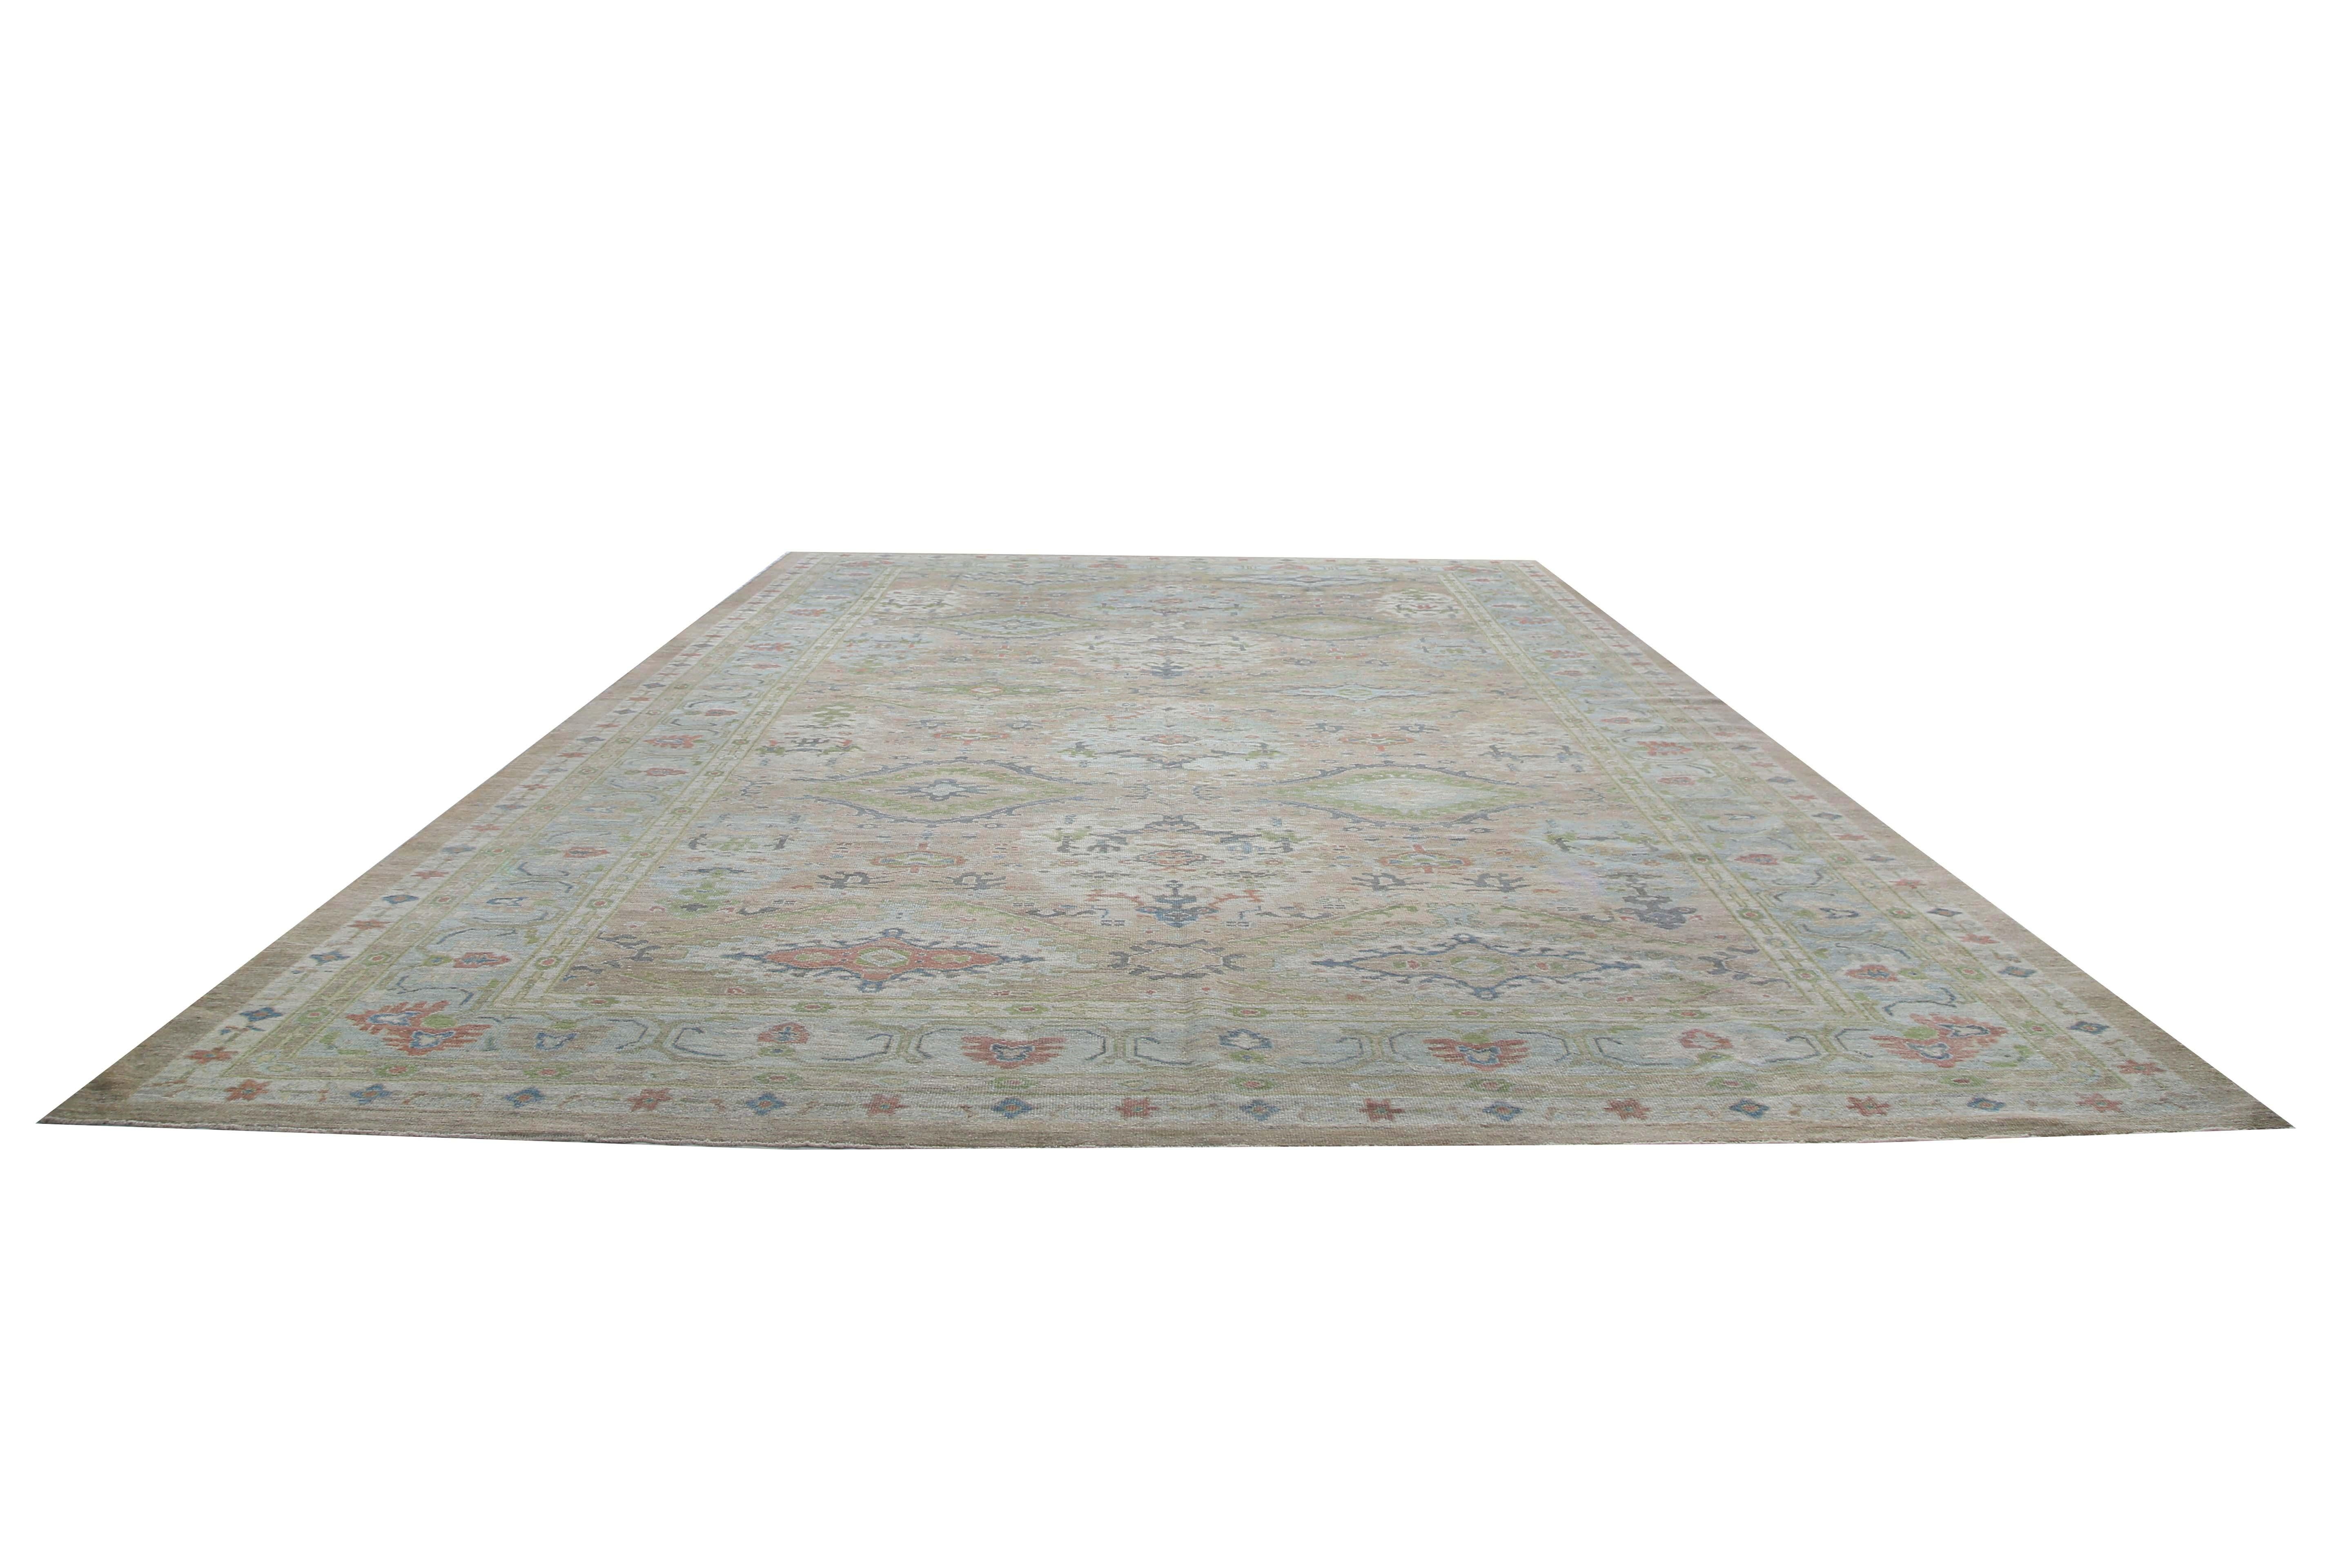 Looking for a statement piece to tie your room together? Look no further than this stunning Turkish Sultanabad rug! Measuring 12'4'' by 18'8'', this rug boasts a beige background with colorful design elements, including green, red, and light blue.